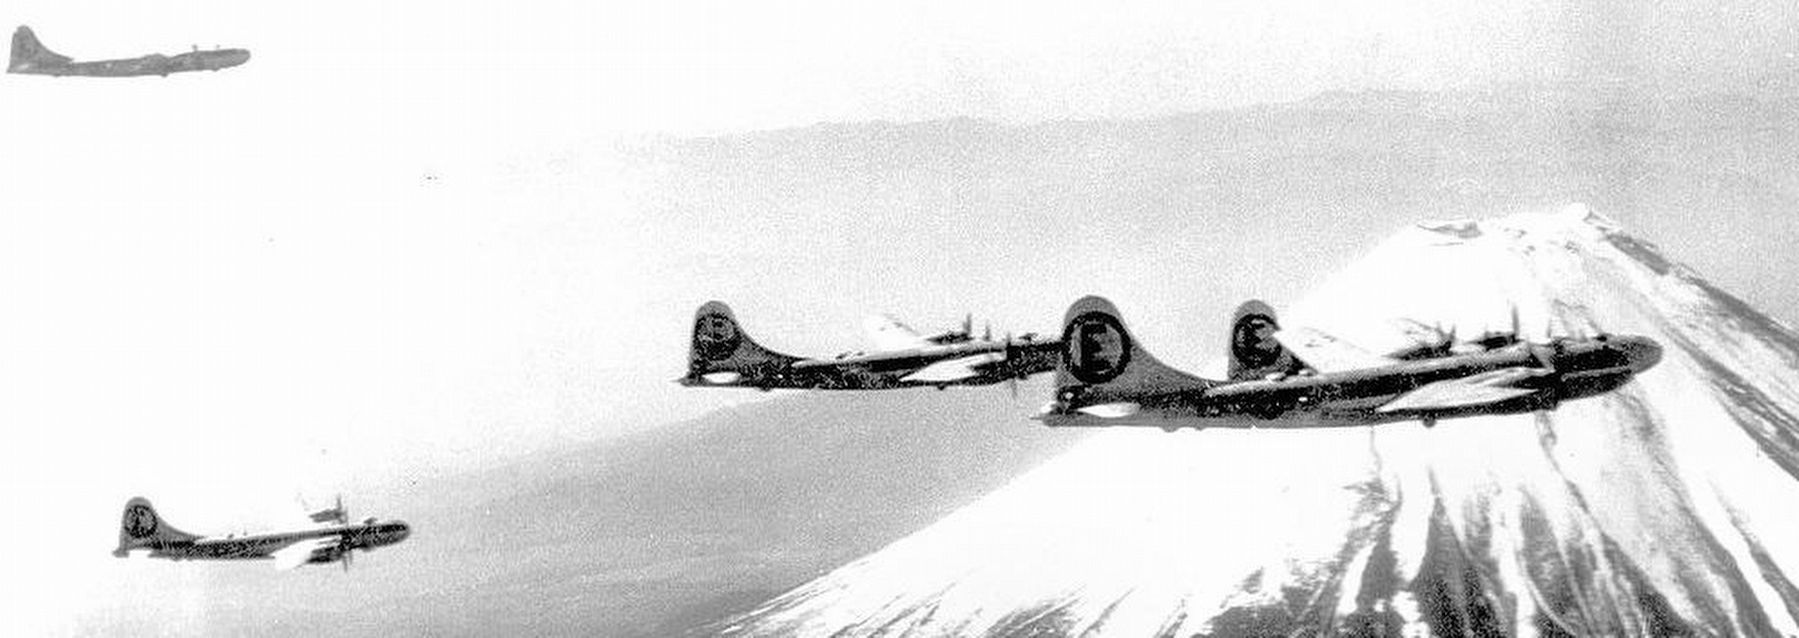 B-29 Superfortresses of the 504th Bombardment Group over Mount Fuji, 1945 image. Click for full size.